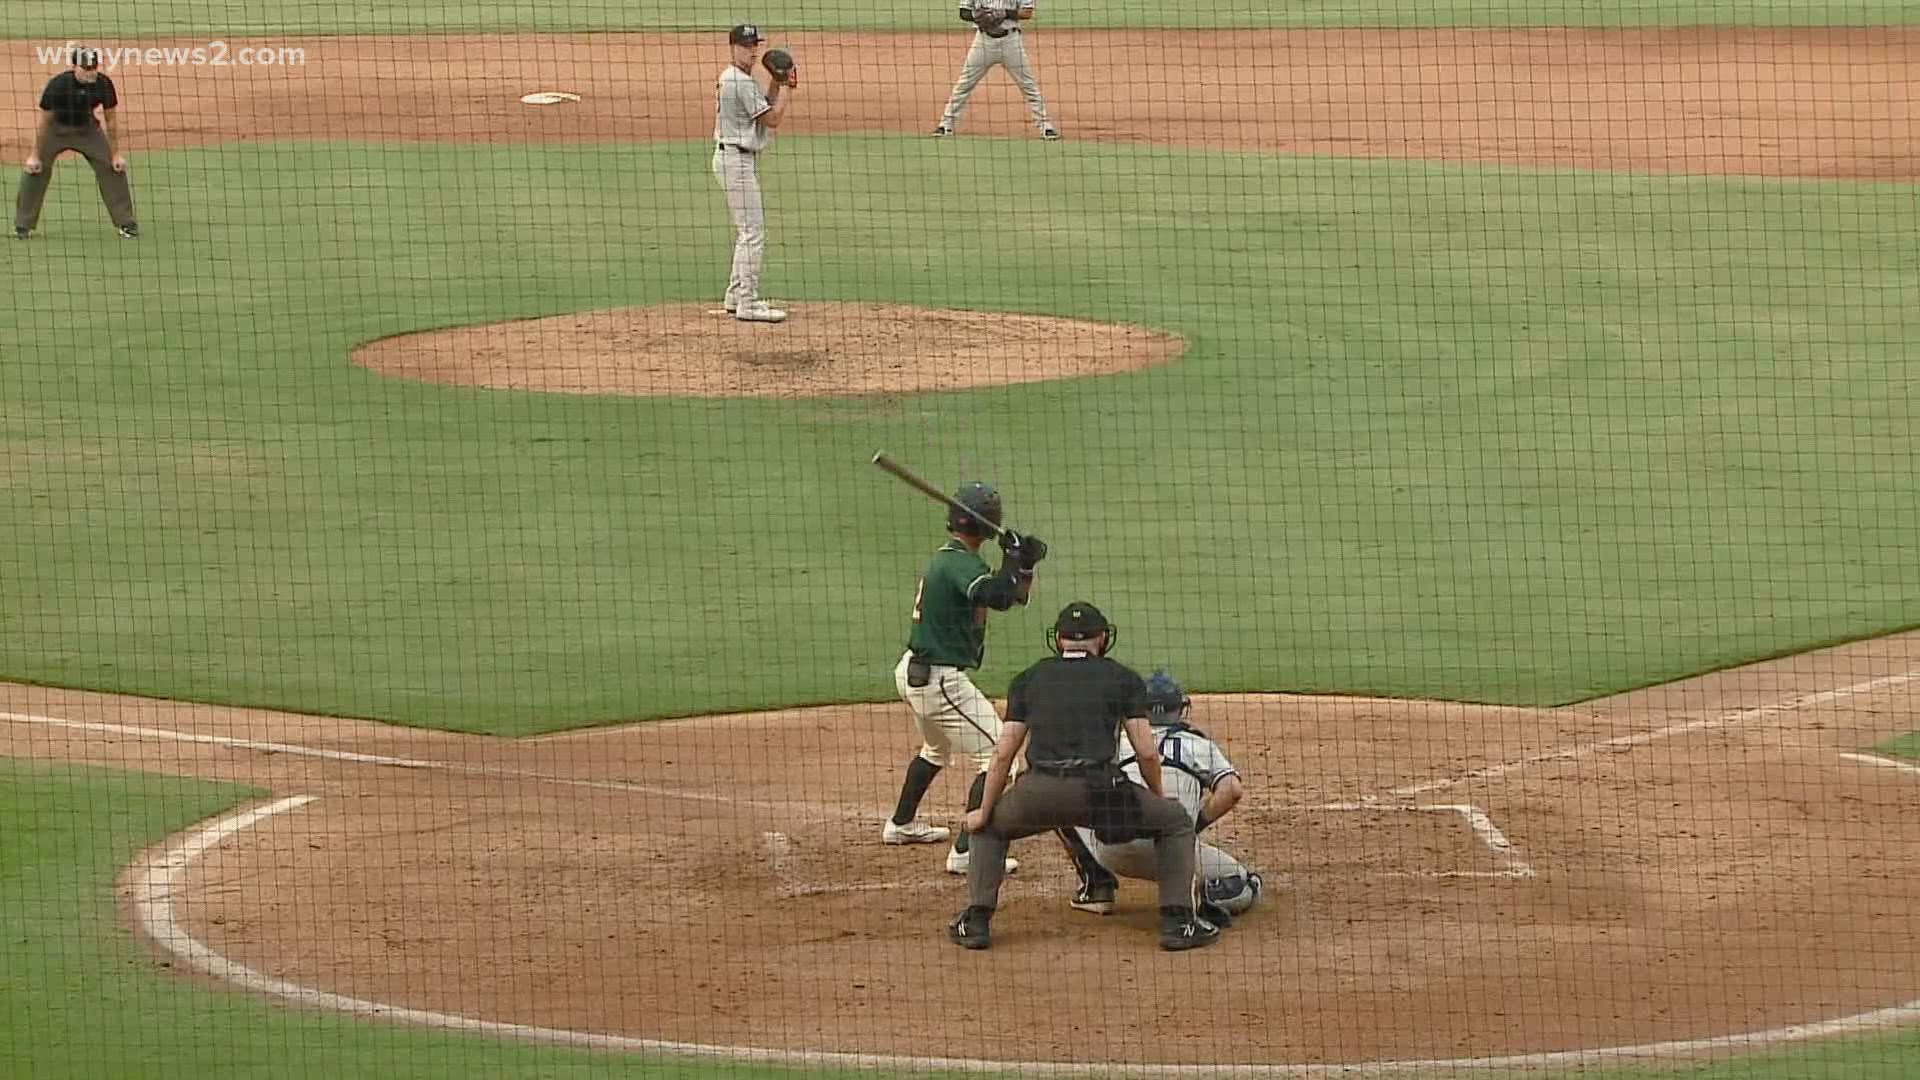 The Greensboro Grasshoppers play in the High A East playoffs starting at 6:30.